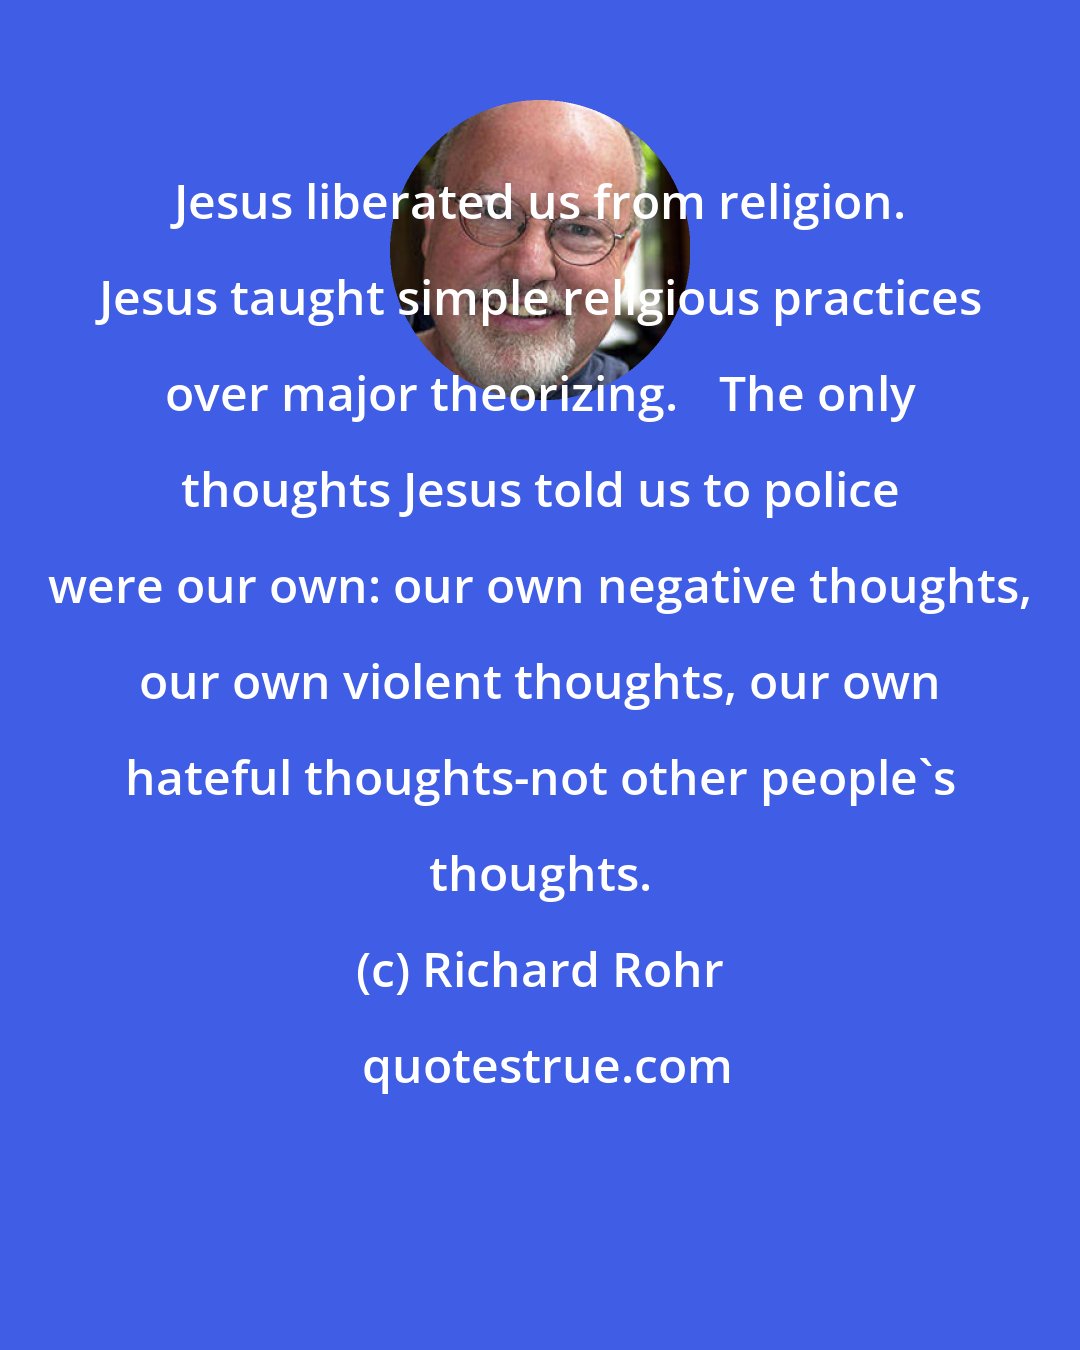 Richard Rohr: Jesus liberated us from religion. Jesus taught simple religious practices over major theorizing. The only thoughts Jesus told us to police were our own: our own negative thoughts, our own violent thoughts, our own hateful thoughts-not other people's thoughts.